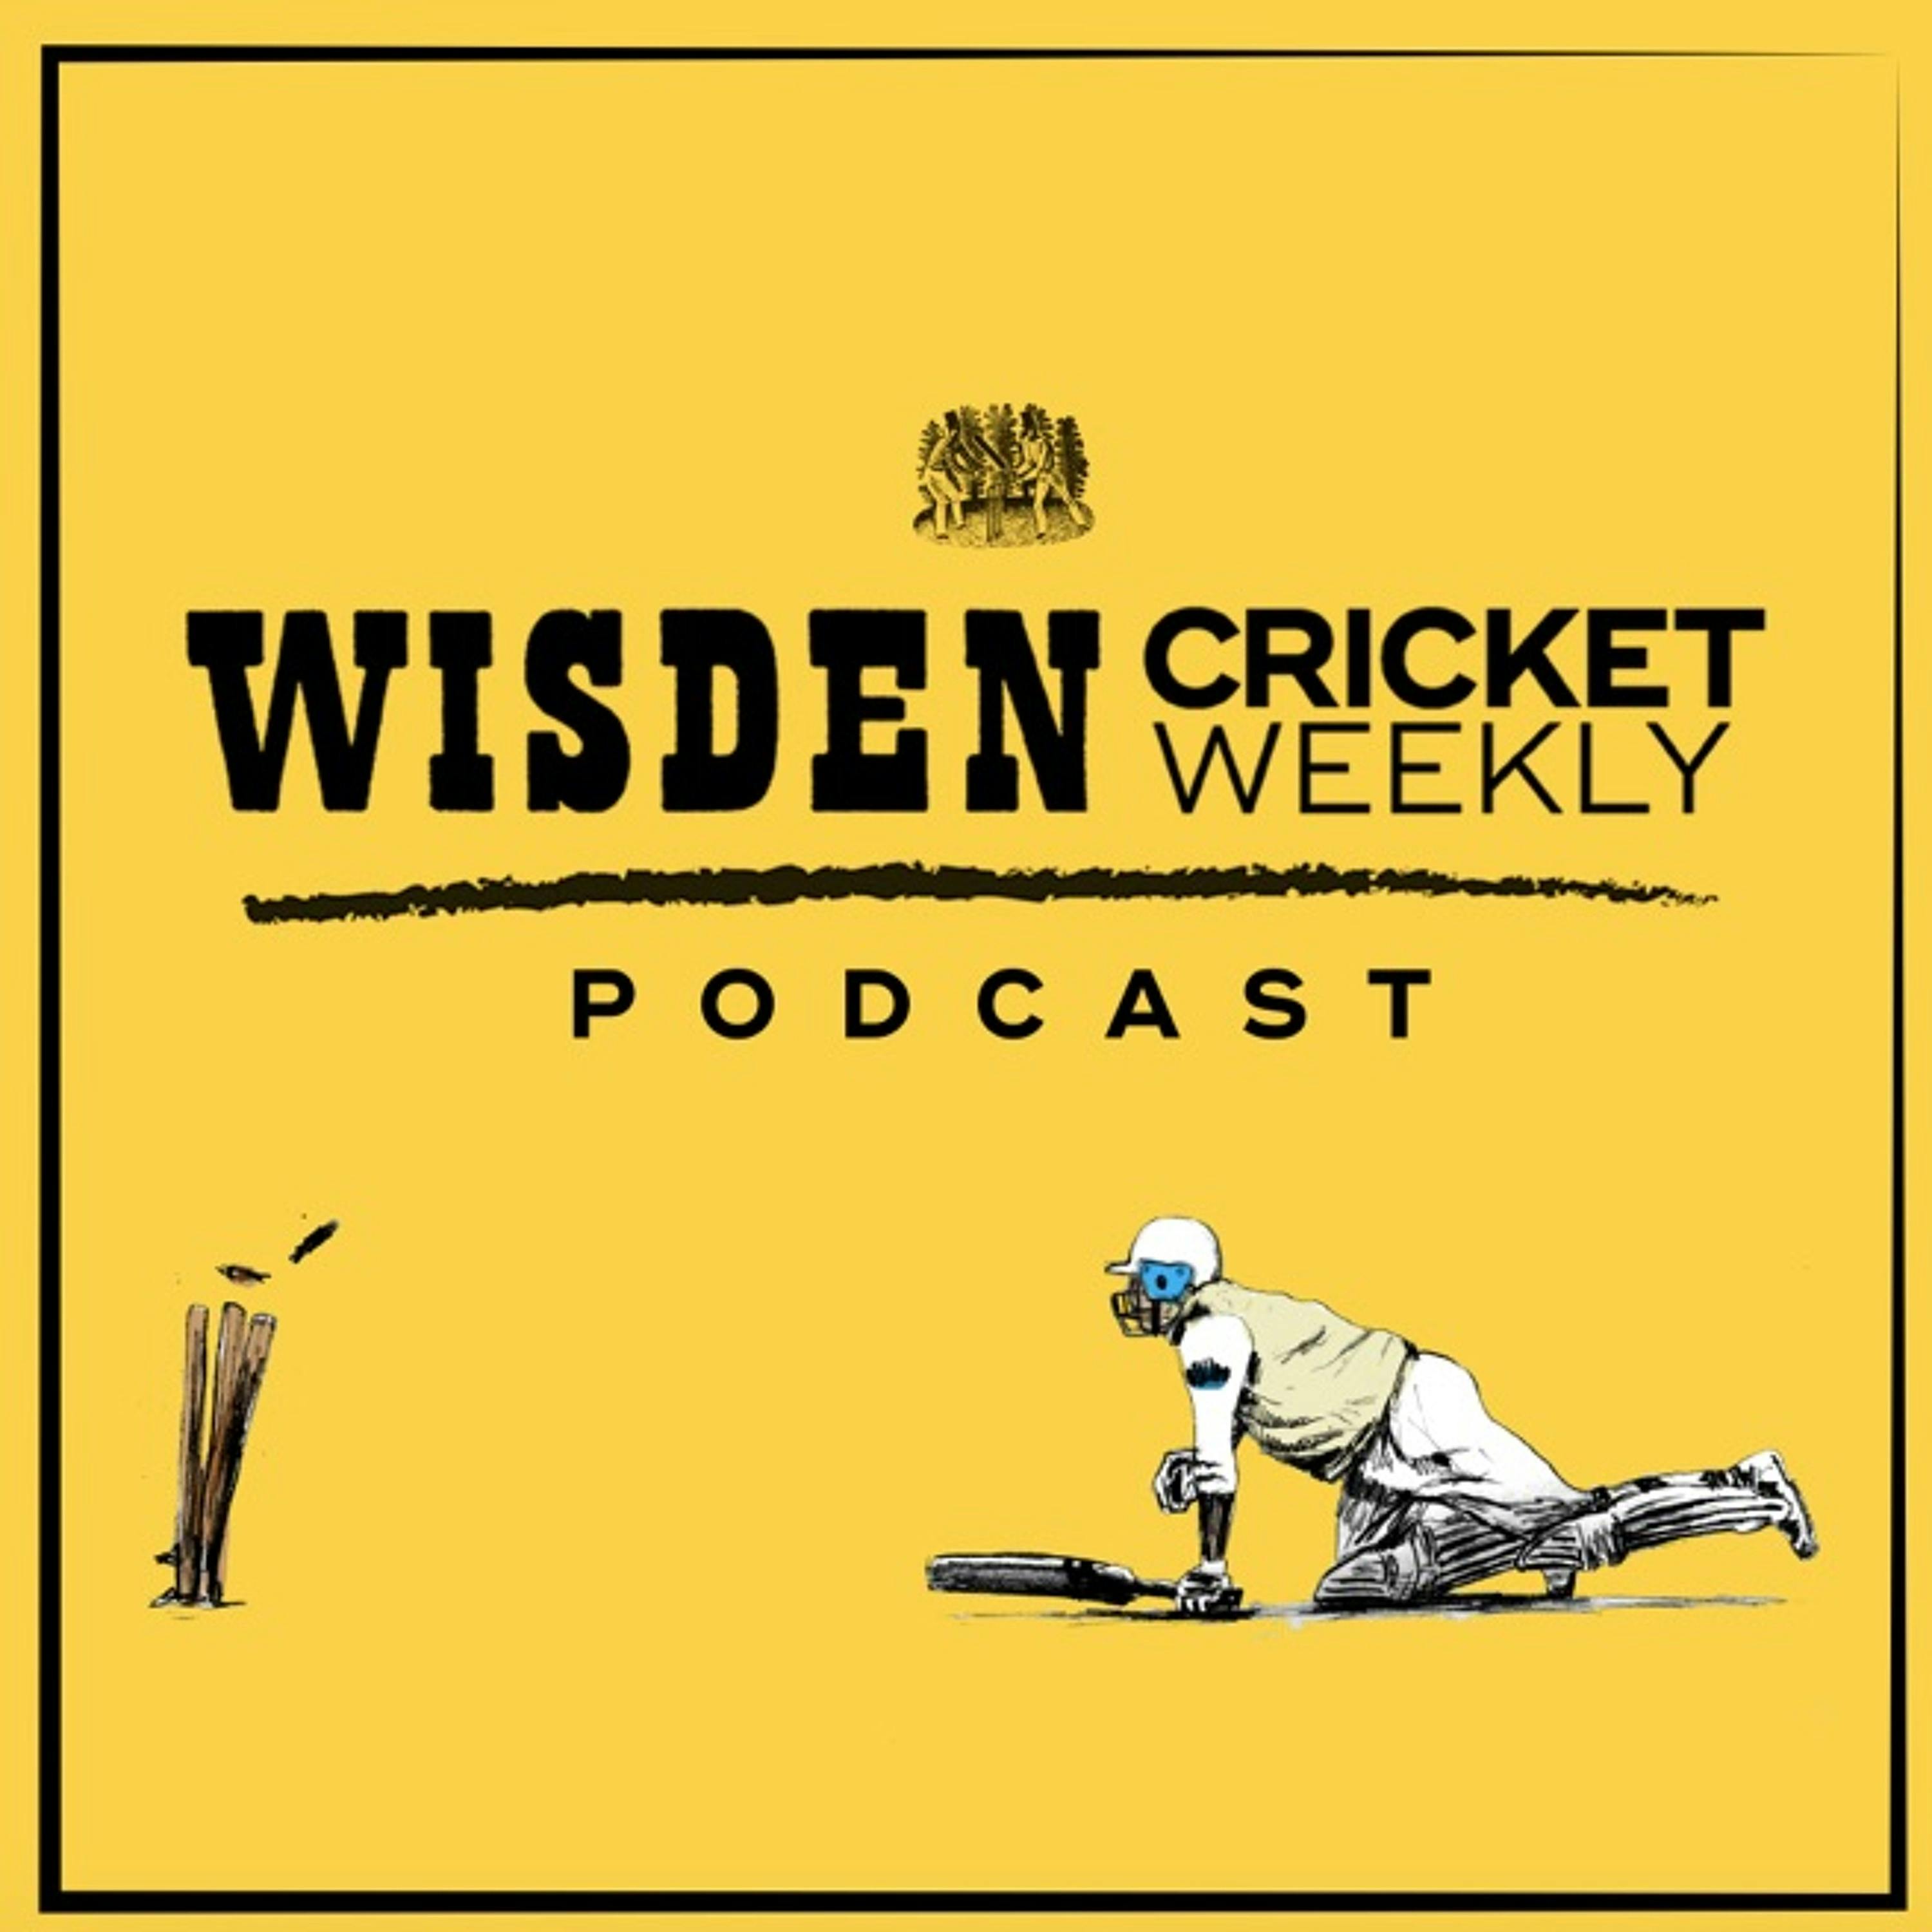 Episode 13 – Caribbean special with Derek Pringle and Graham Gooch